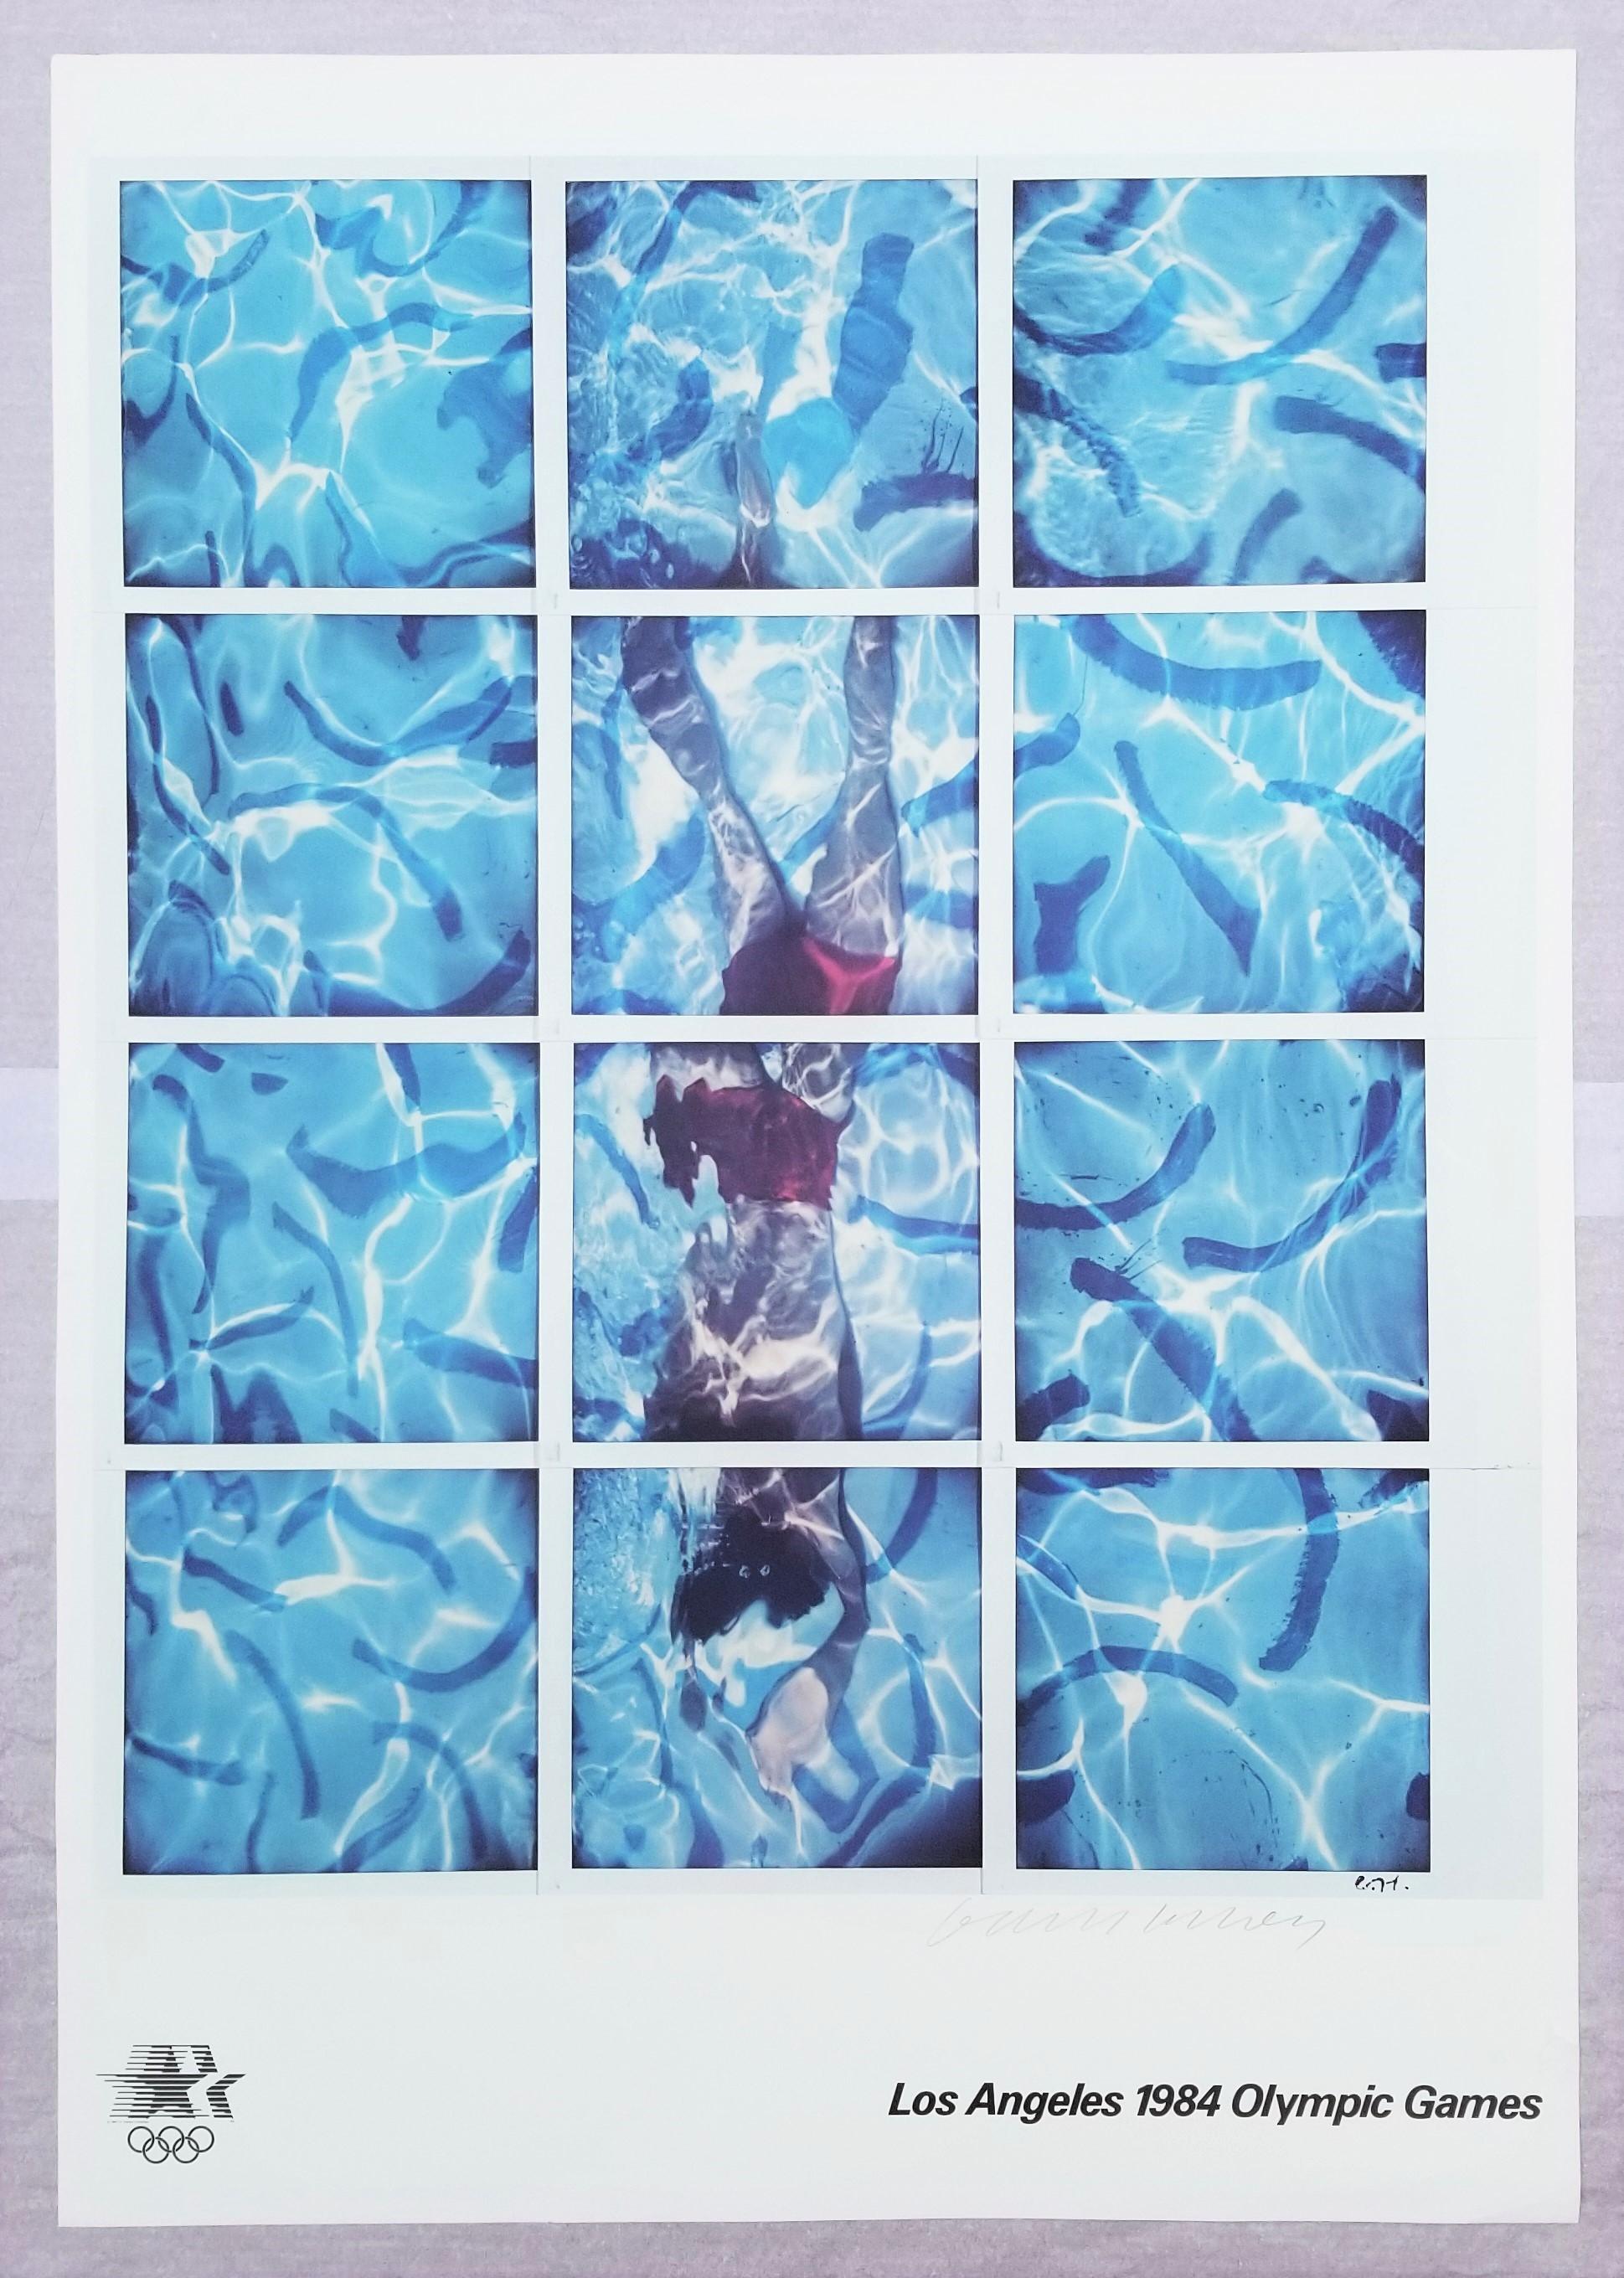 Los Angeles 1984 Olympic Games (Polaroids of Swimmer) Poster (Signed) - Print by David Hockney